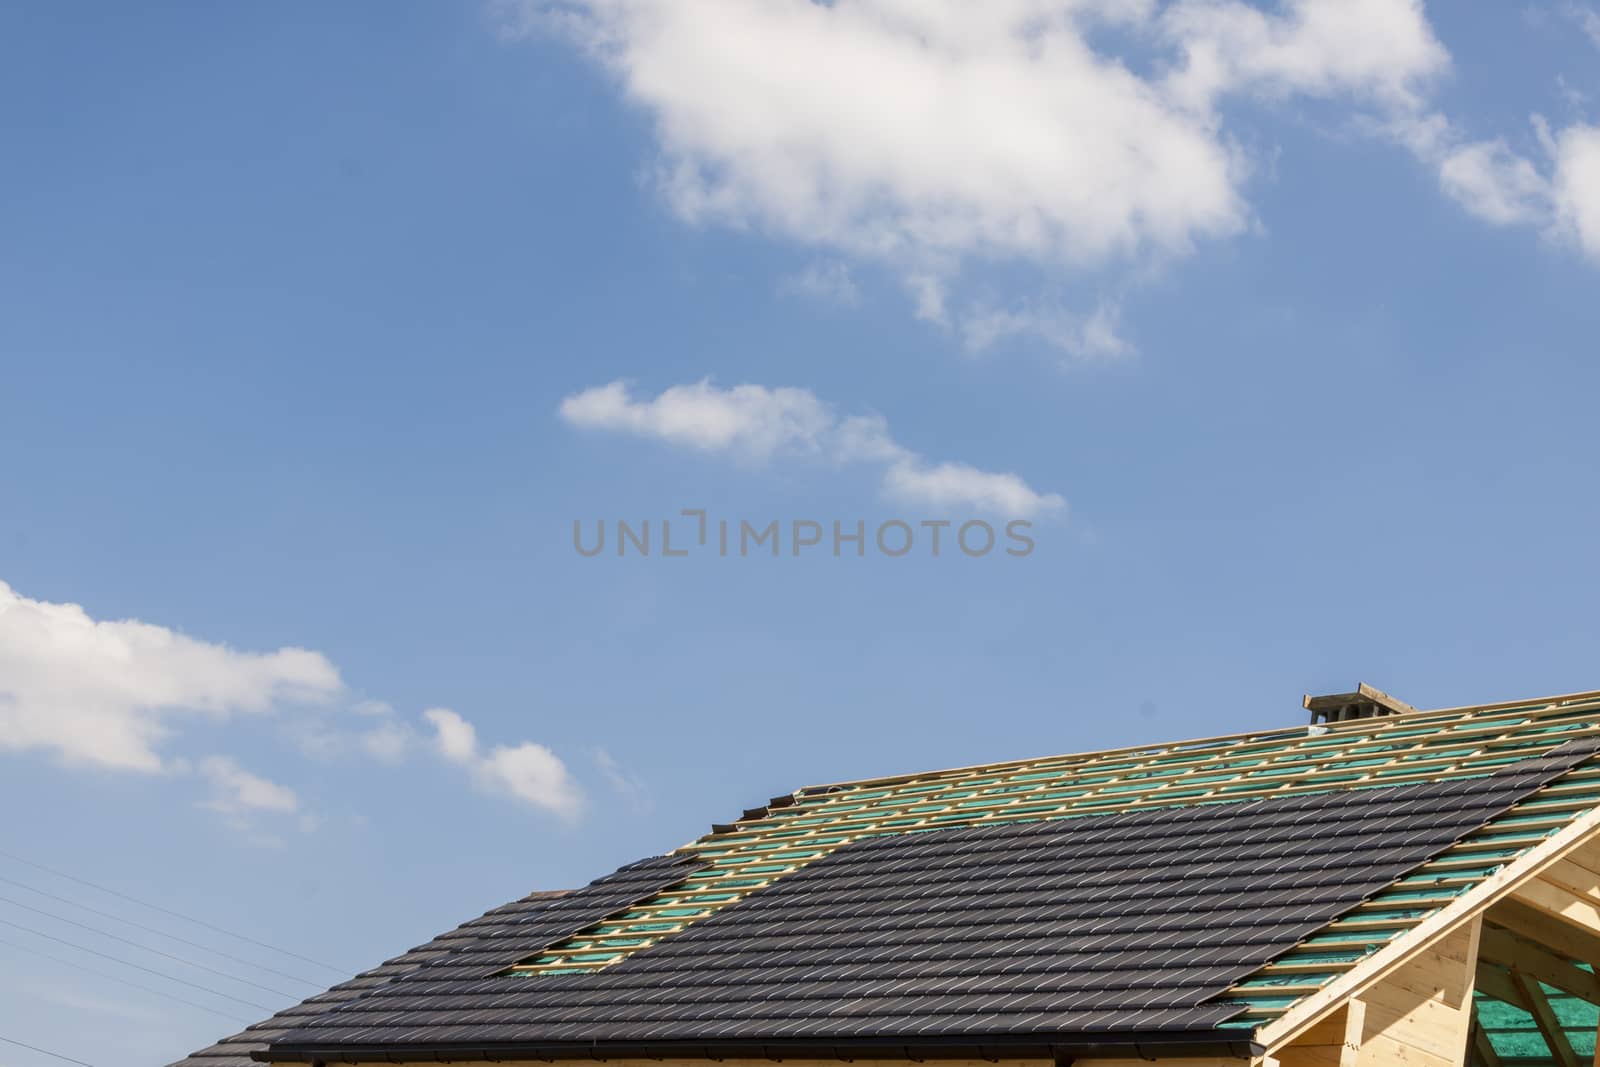 Unfinished roof by parys